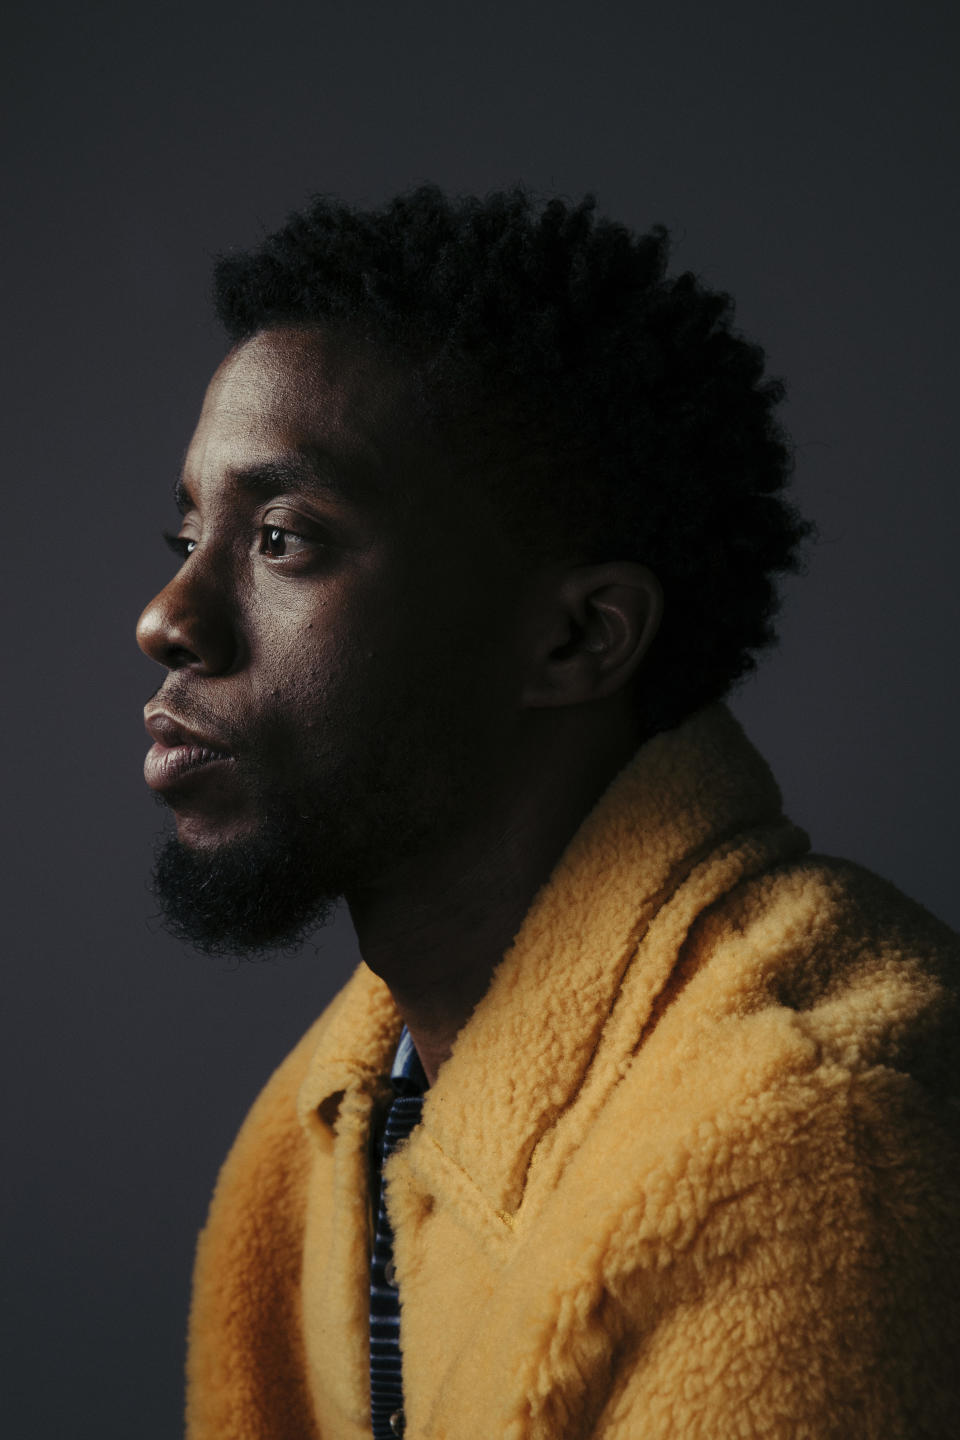 FILE - In this Feb. 14, 2018 photo, actor Chadwick Boseman poses for a portrait in New York. Boseman portrayed music legend James Brown in the 2014 film "Get On Up." (Photo by Victoria Will/Invision/AP, File)